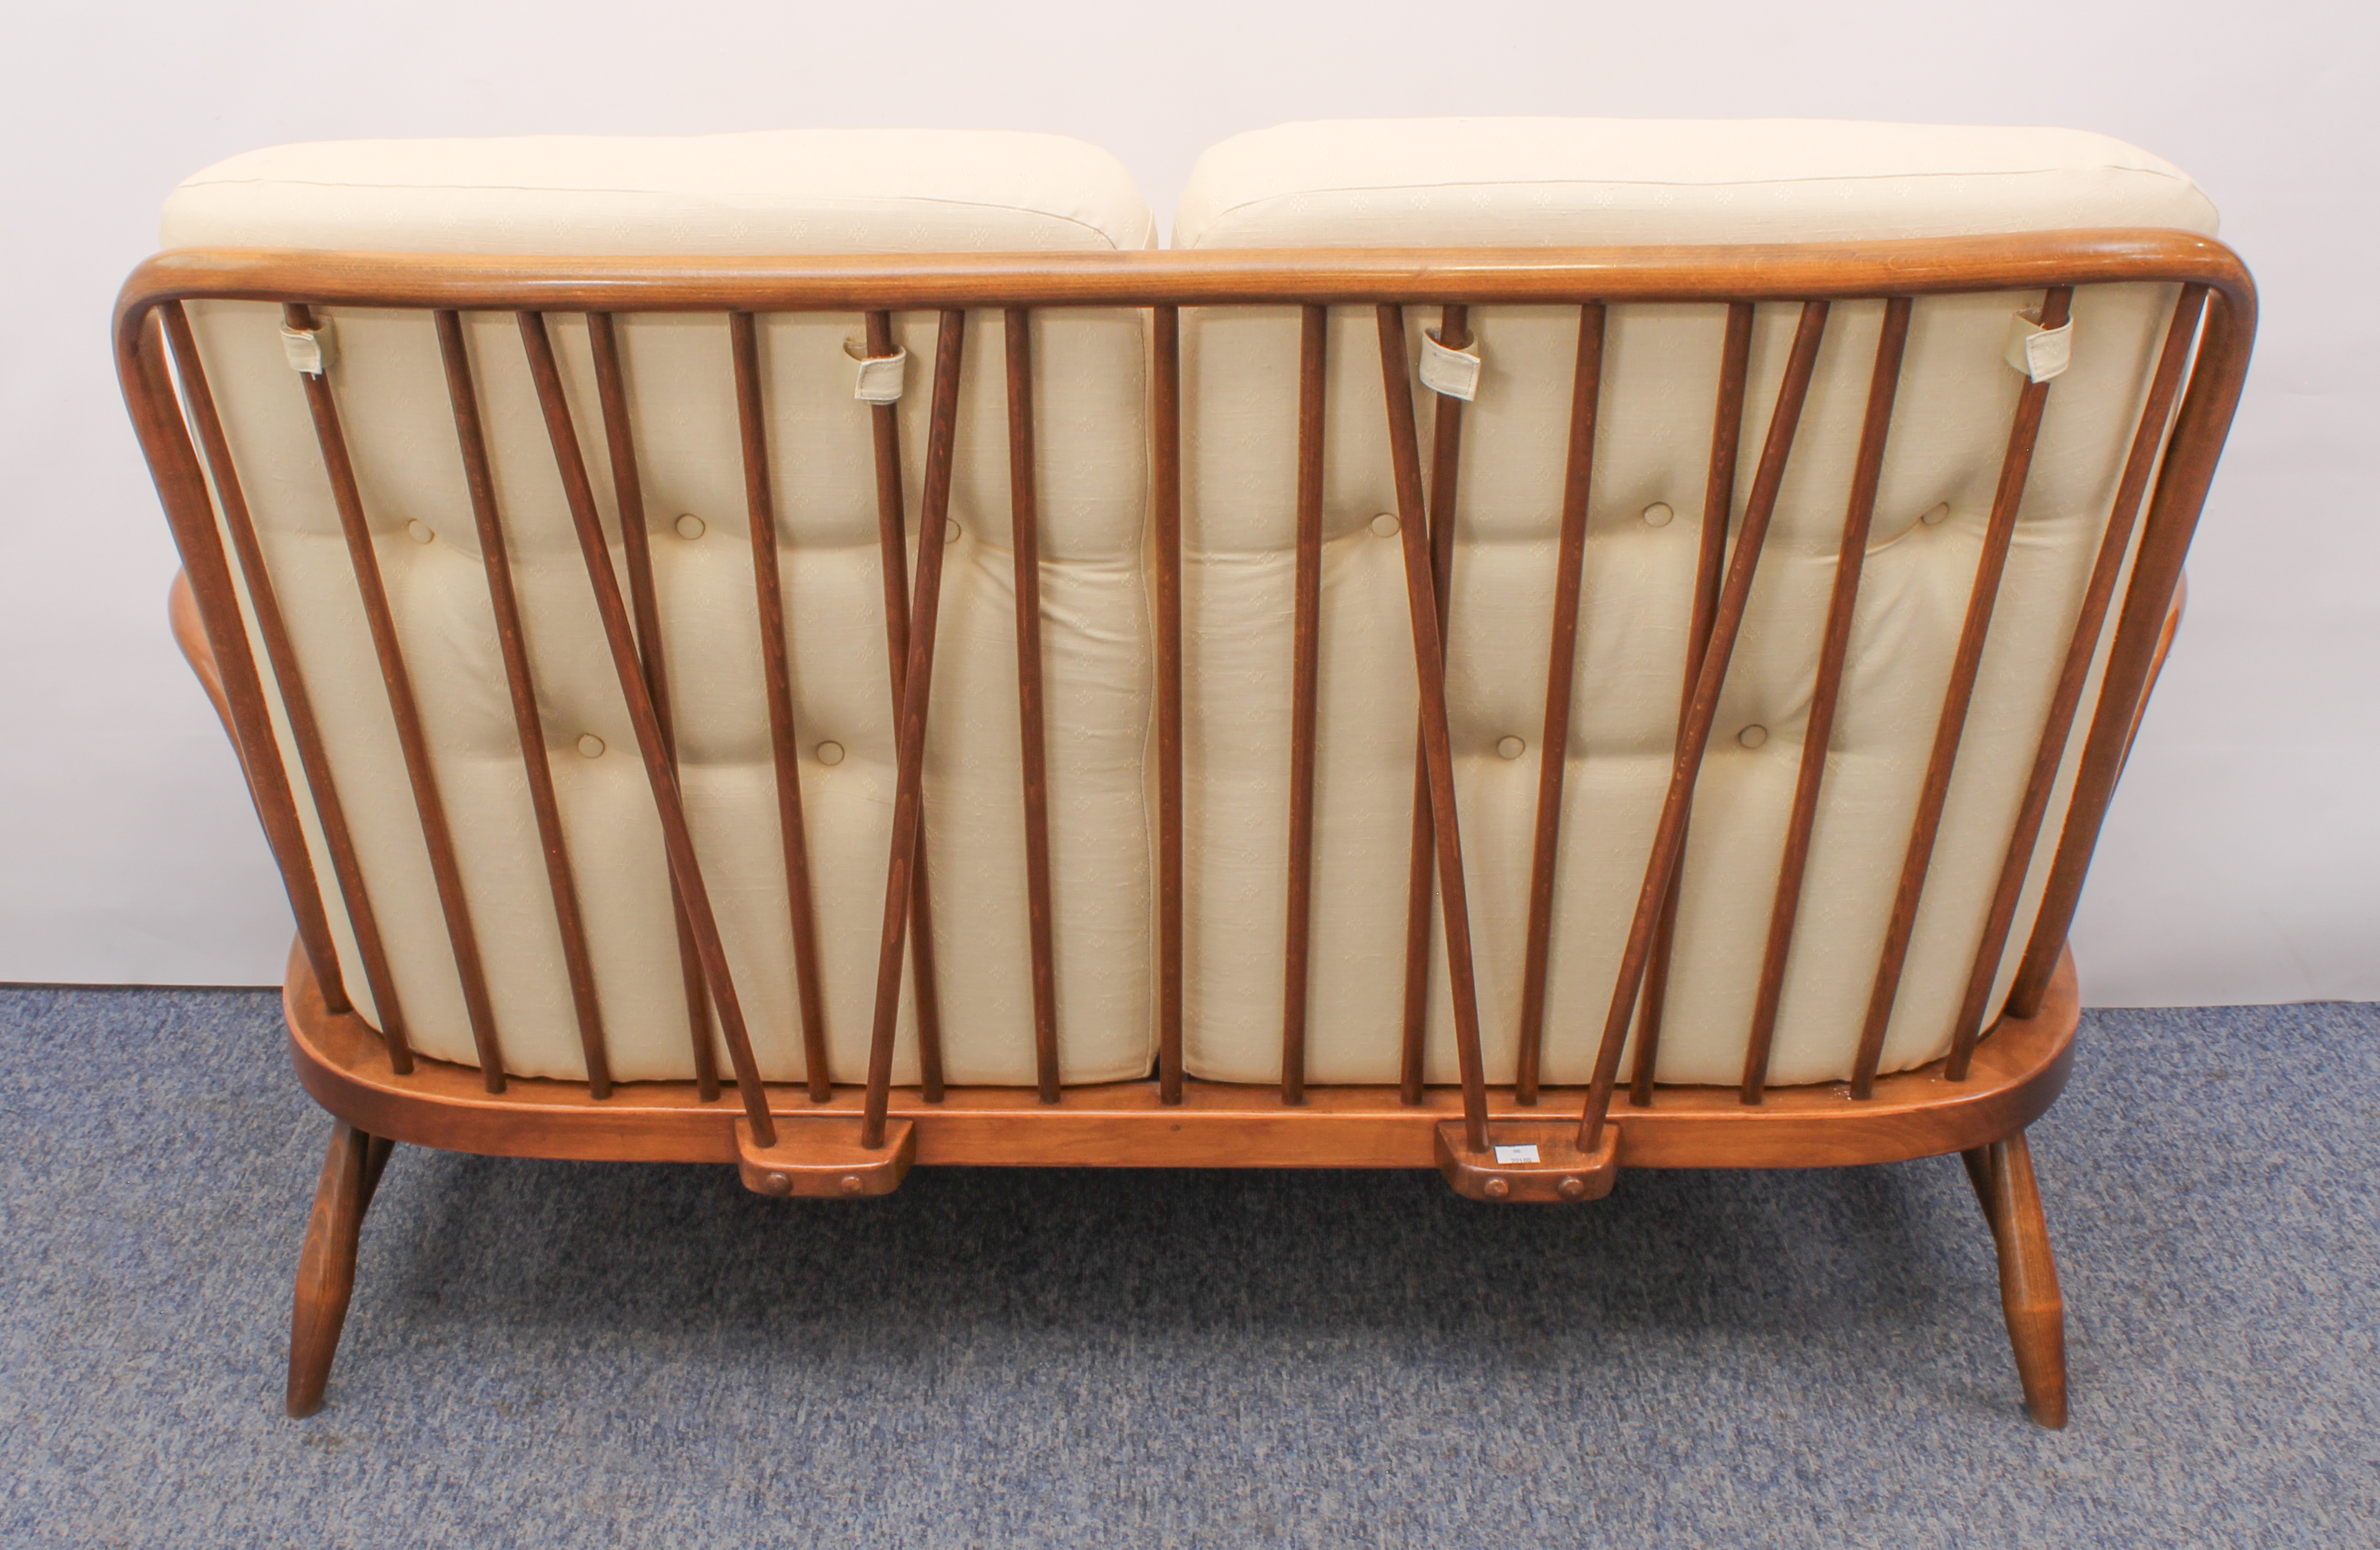 An Ercol Windsor beech and elm two-seater sofa - Jubilee model, no.766, with original pale gold - Image 3 of 4